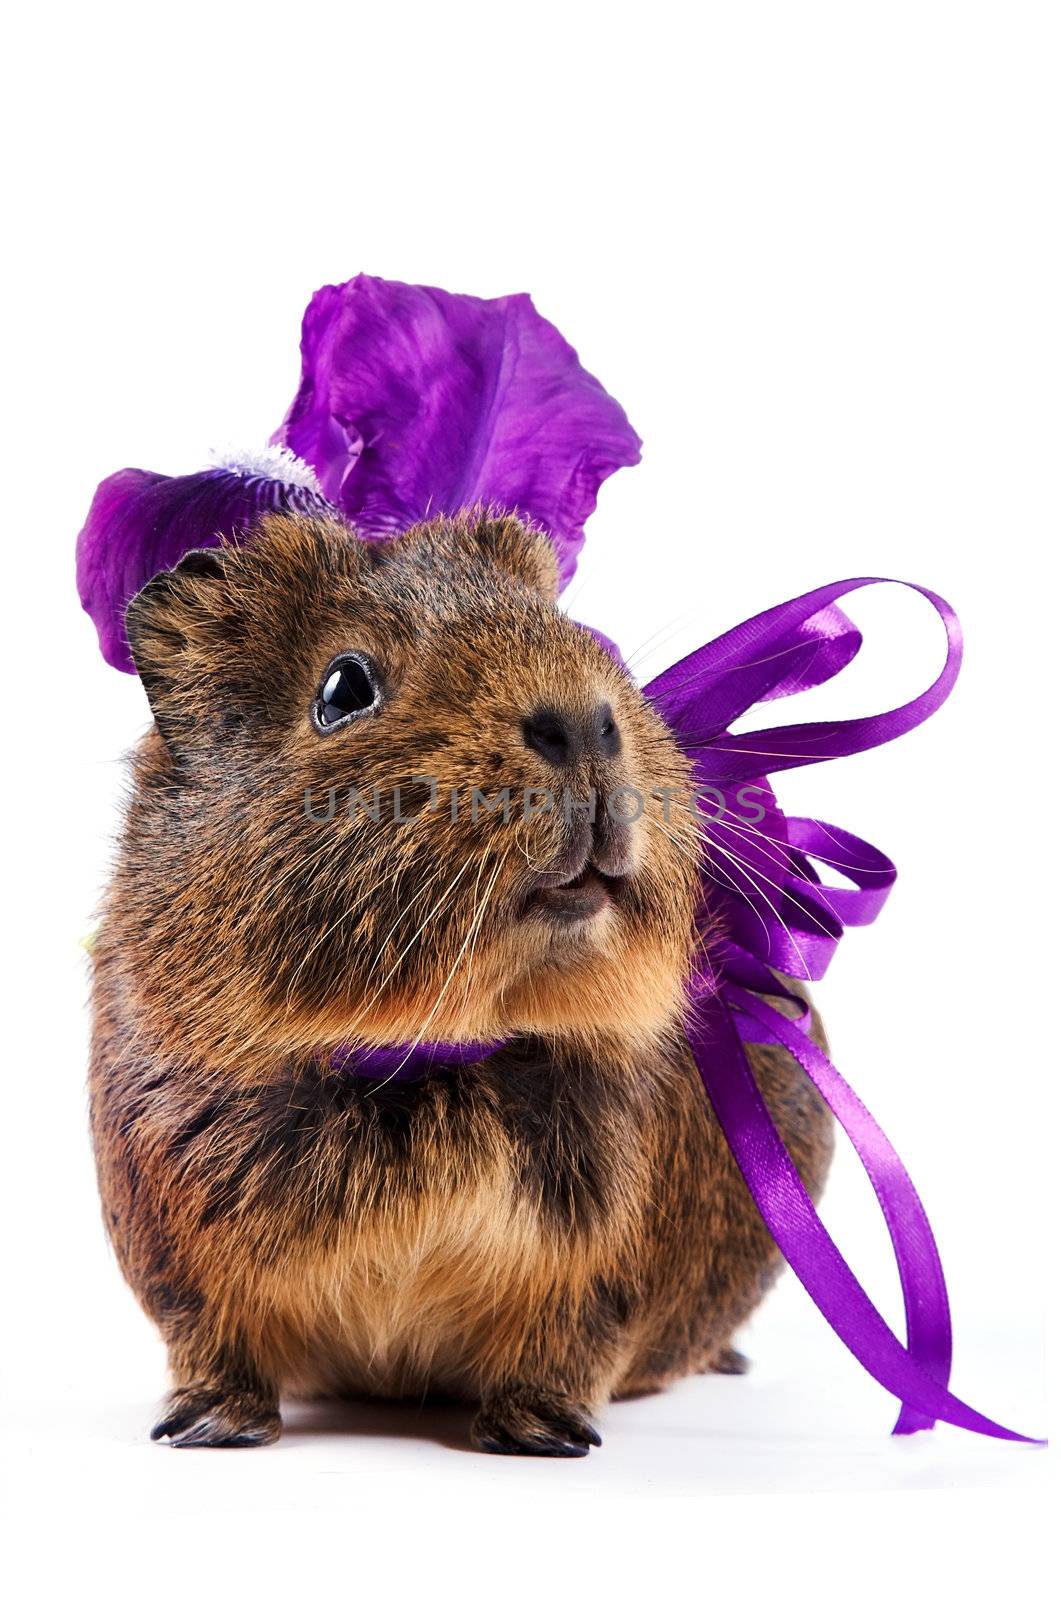 Guinea pig with a violet bow and a flower on a white background